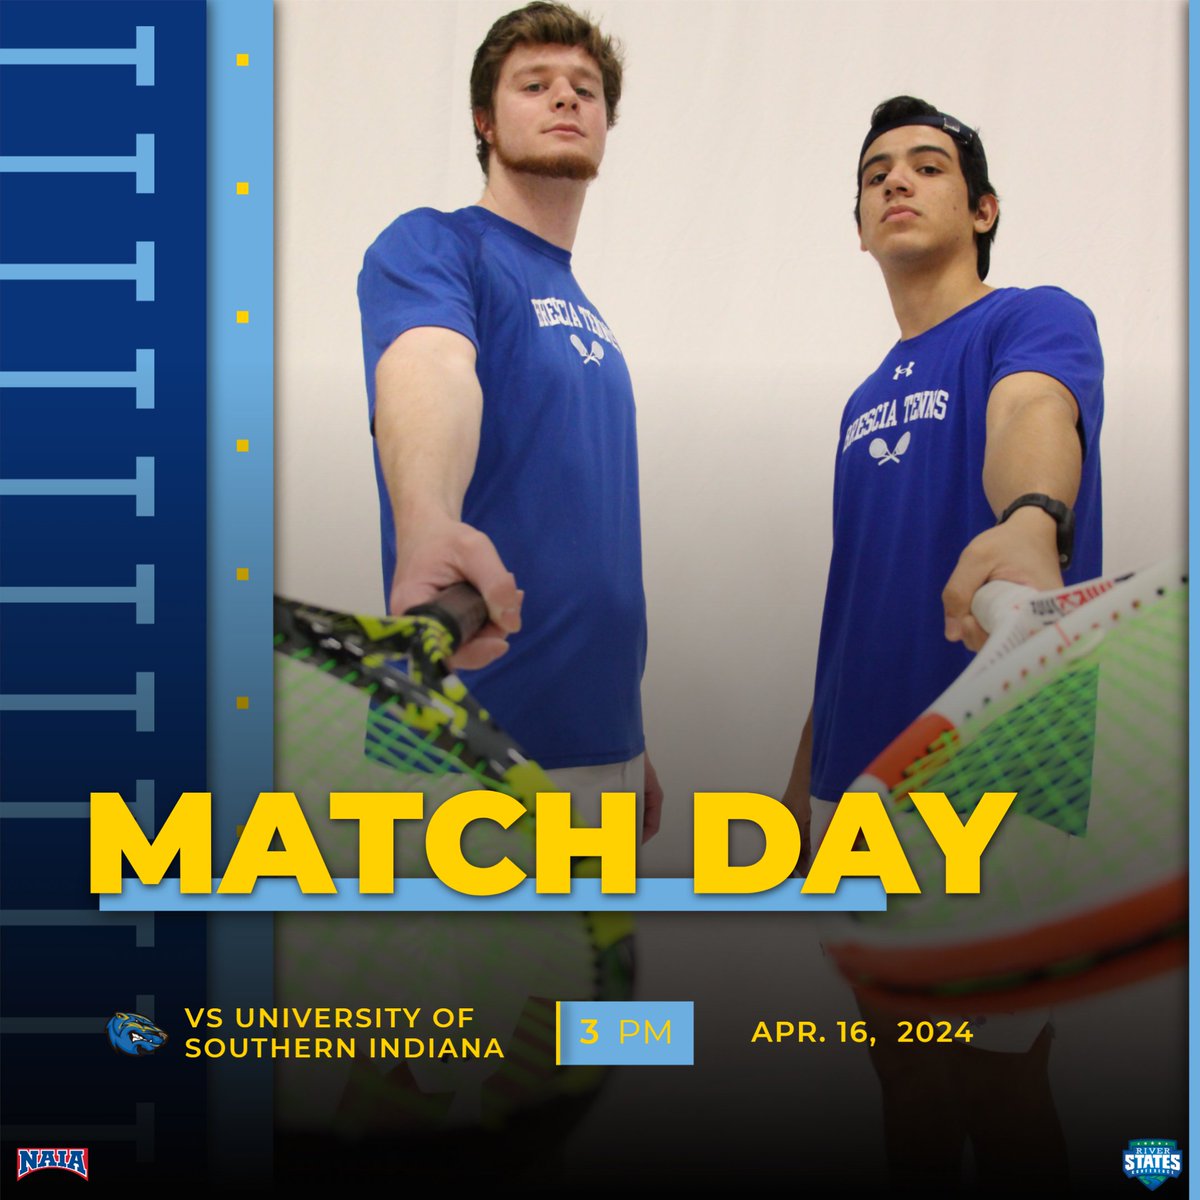 🎾 The boys are ready to take on the Screaming Eagles! 🆚 USI Screaming Eagles 📍 Evansville, IN ⏰ 3pm CT